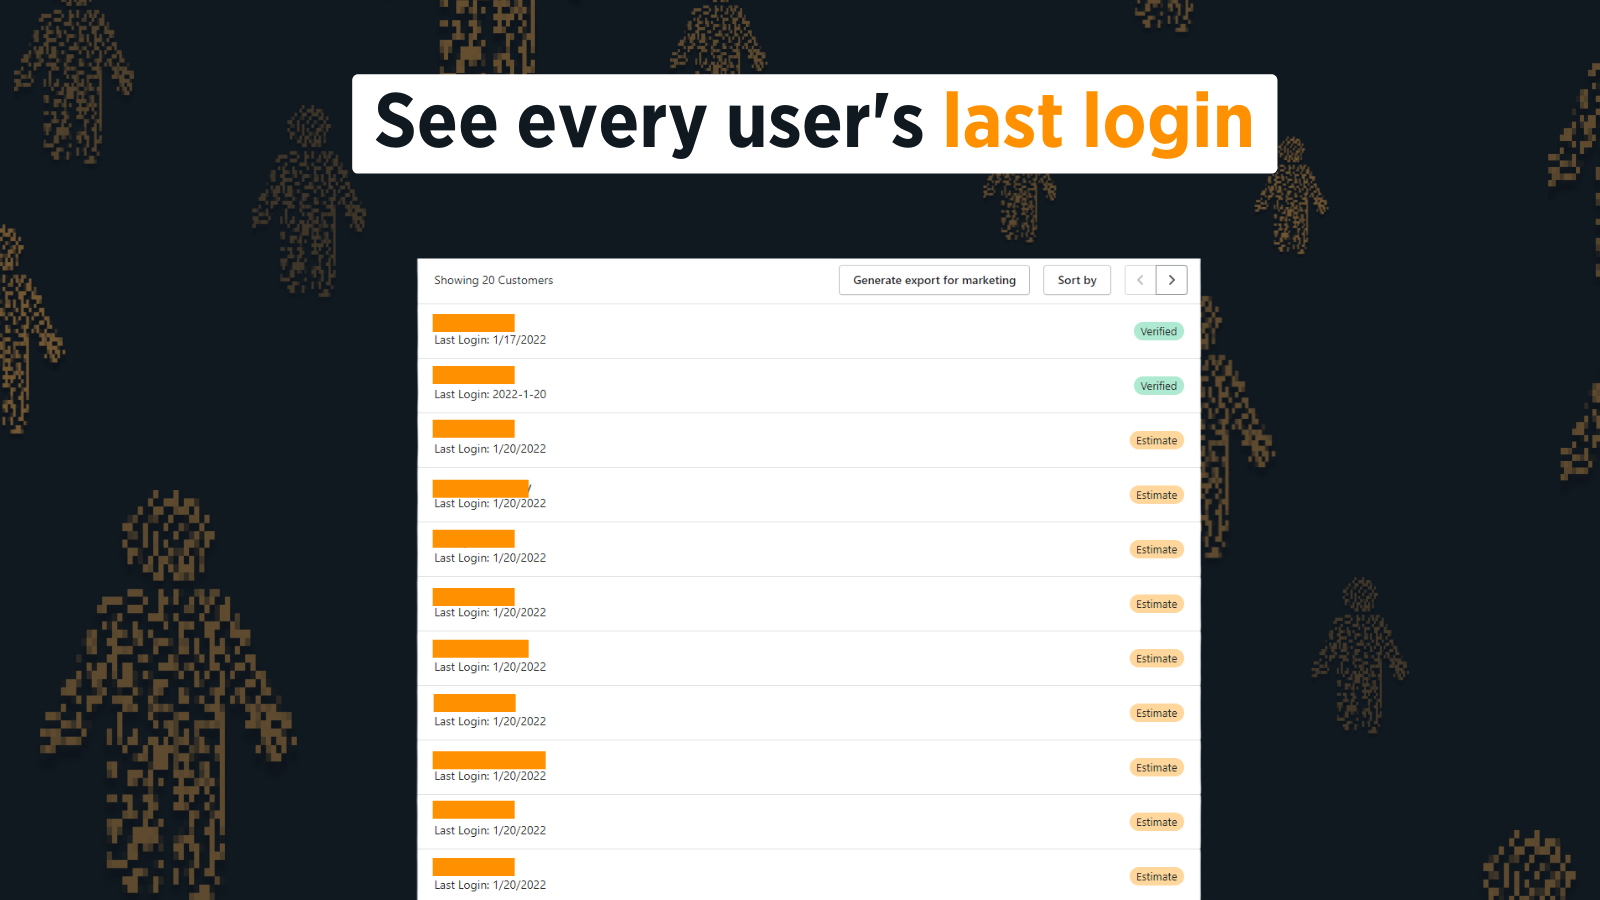 shows a list of customers and their login data